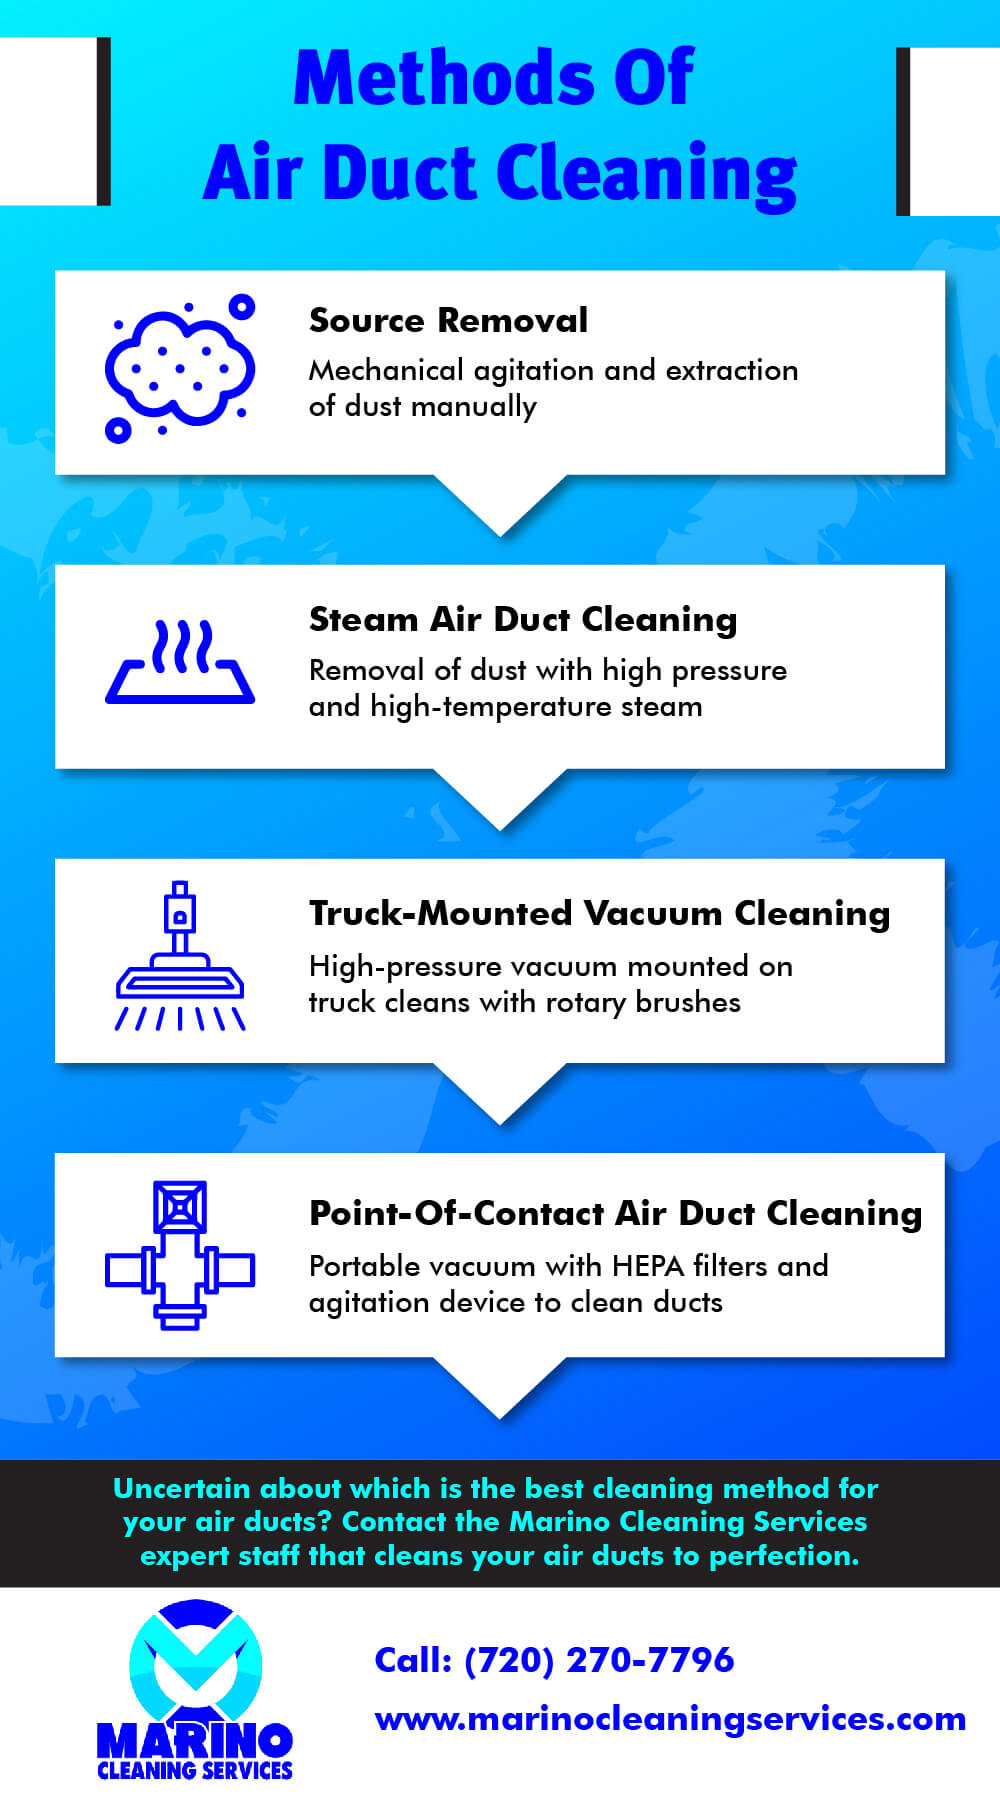 Methods of Air Duct Cleaning